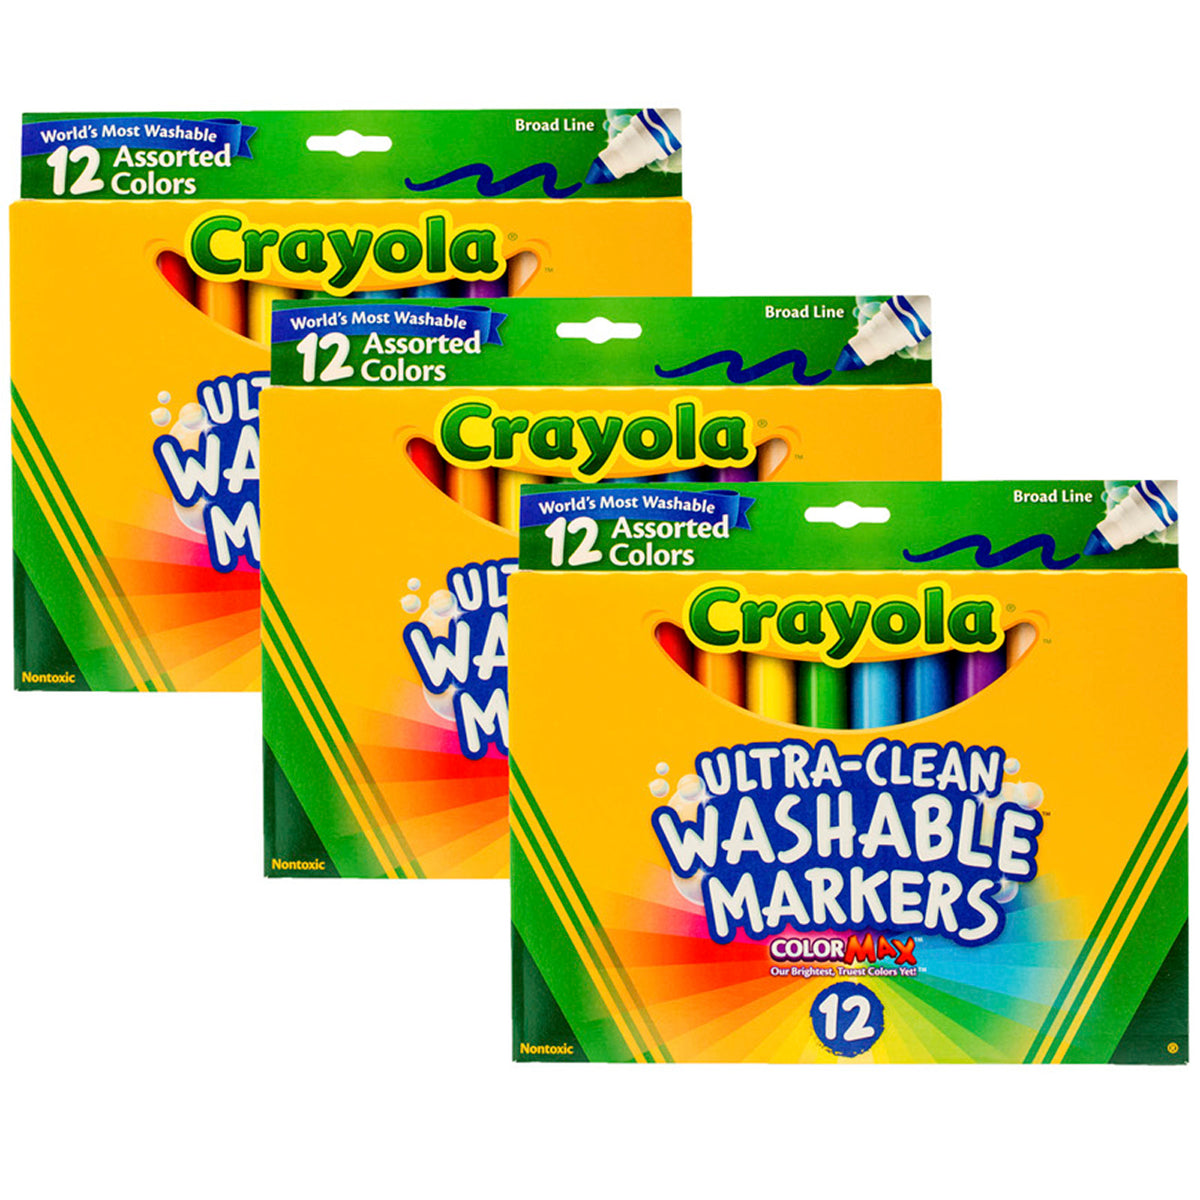 Kids Washable Markers with Non-Toxic Ink Similar to Crayola Markers